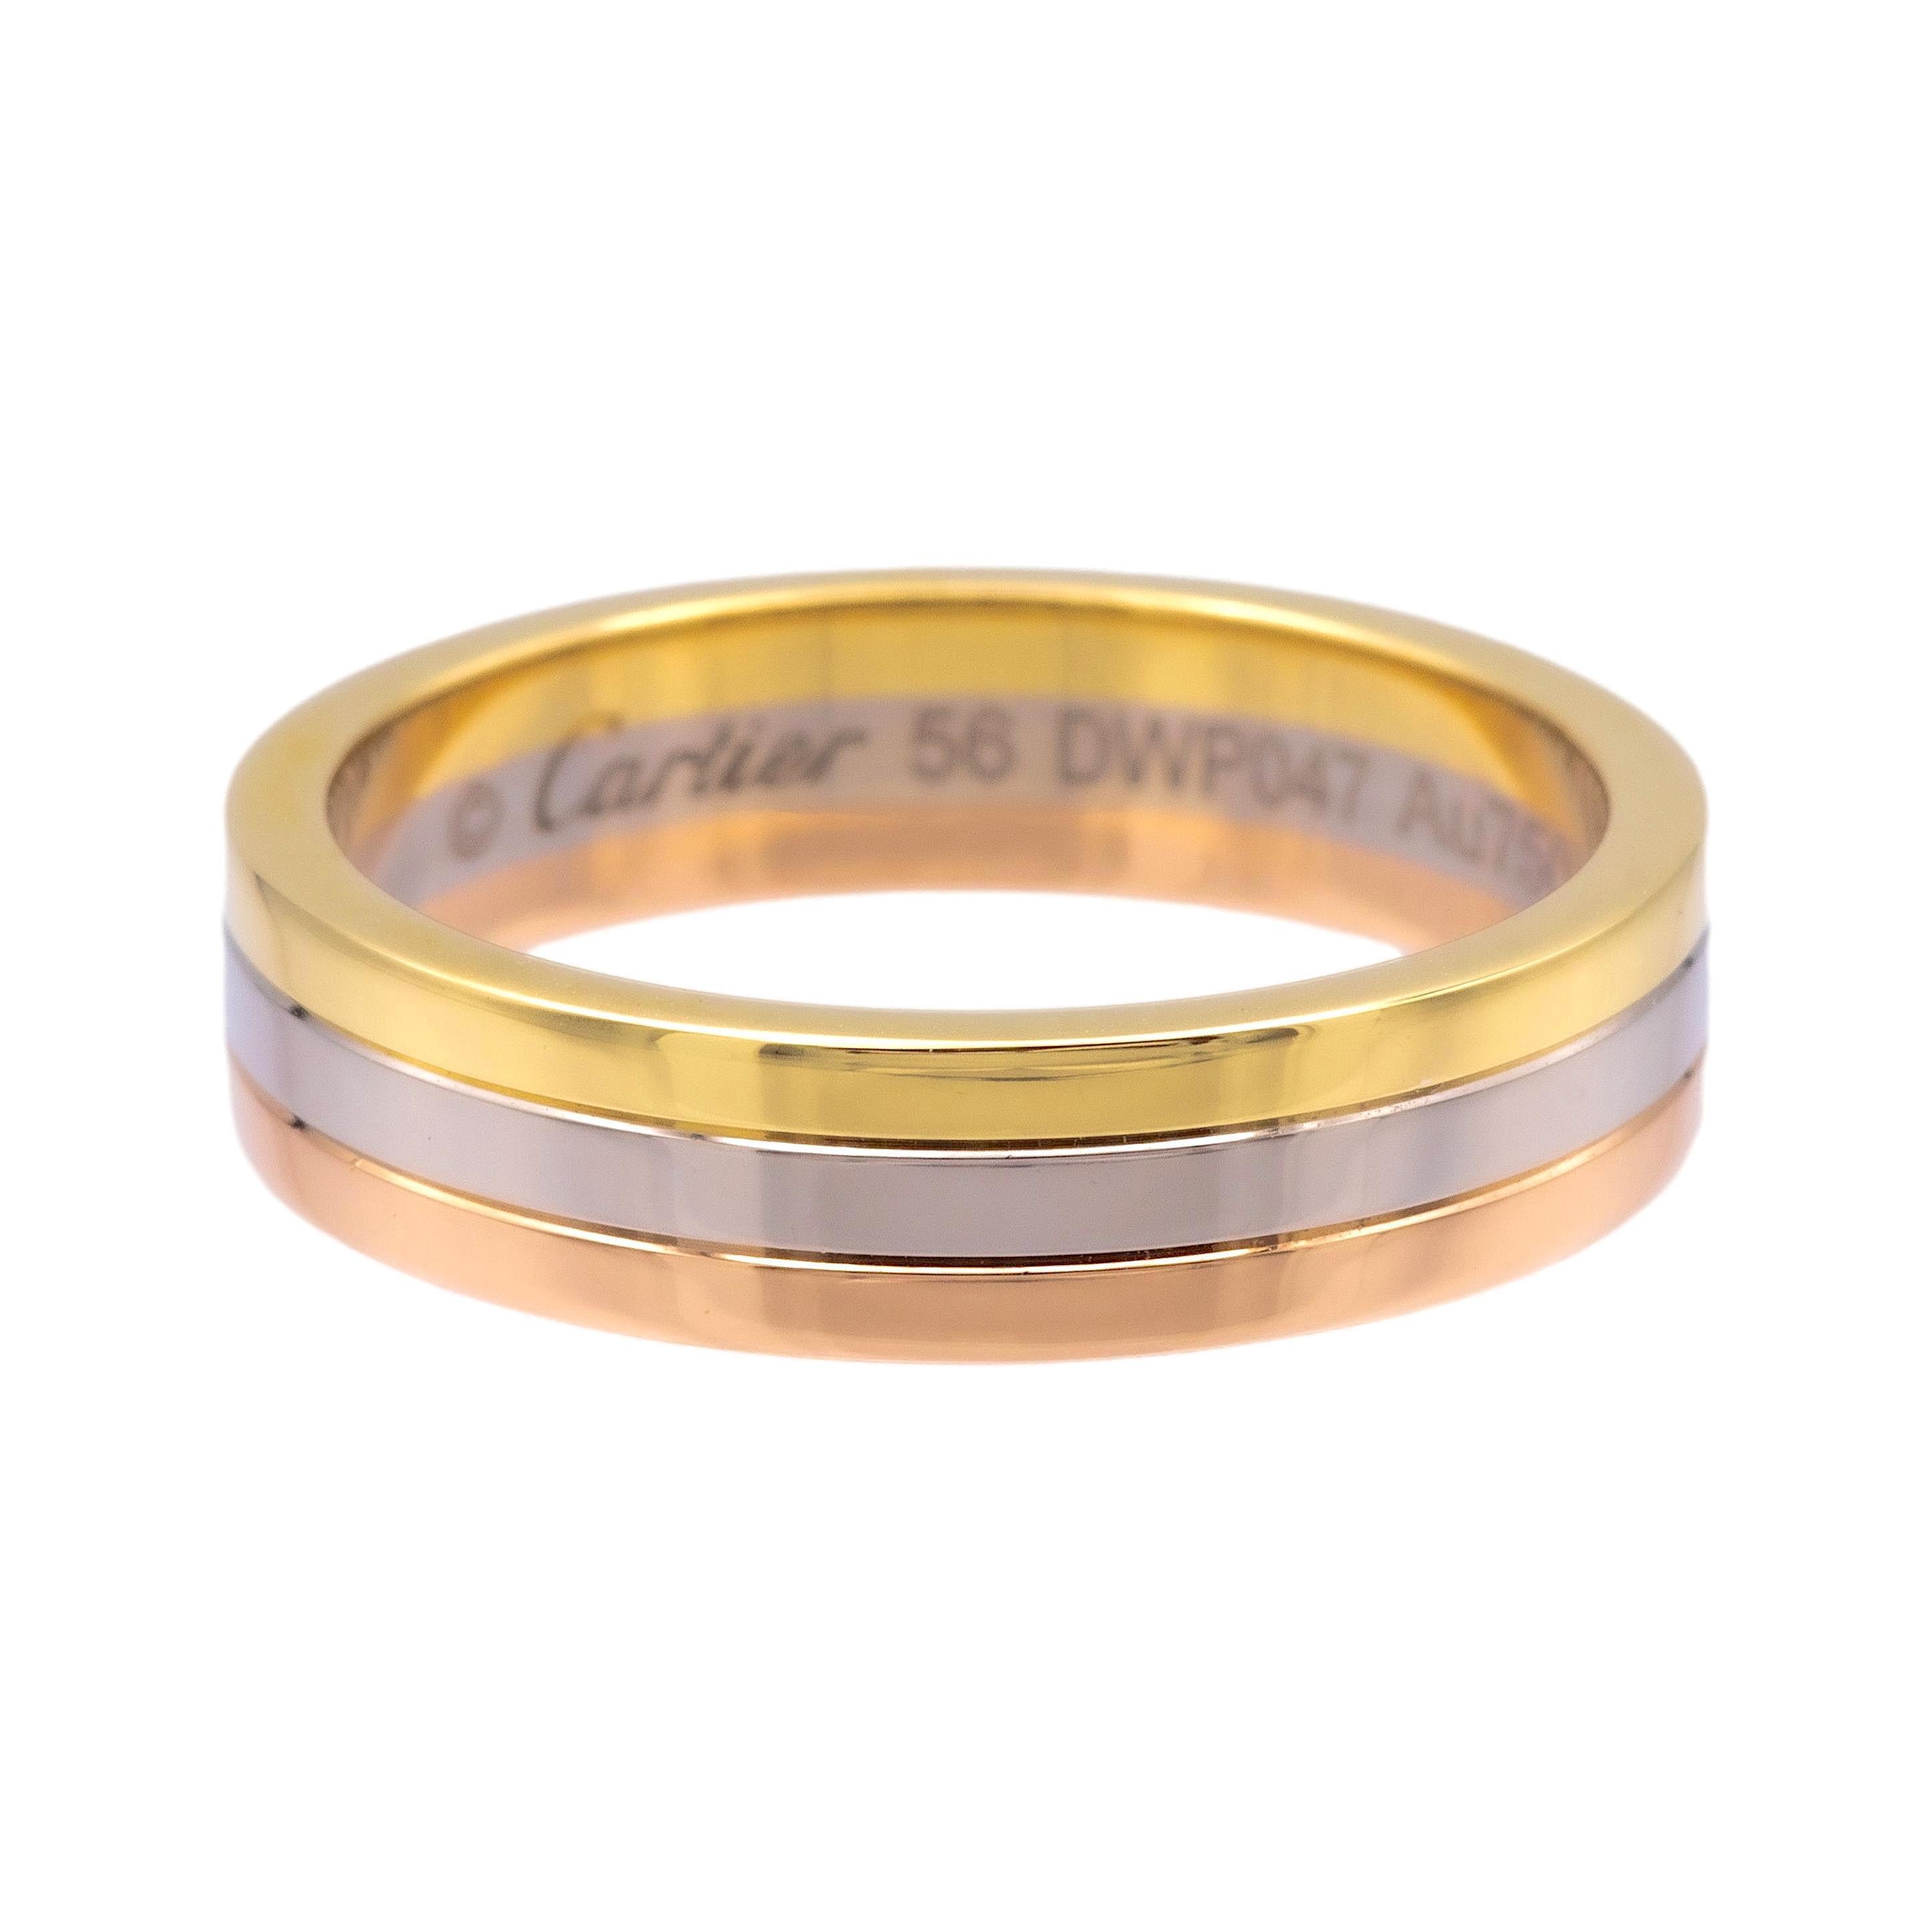 Men's Louis Cartier wedding band ring from the Vendome collection for him finely crafted in three tone 18K yellow, rose and white gold. The band has a ribbed edge finish and measures 4.8mm wide and has a finger size of 56 Europe (7.5 US). Fully